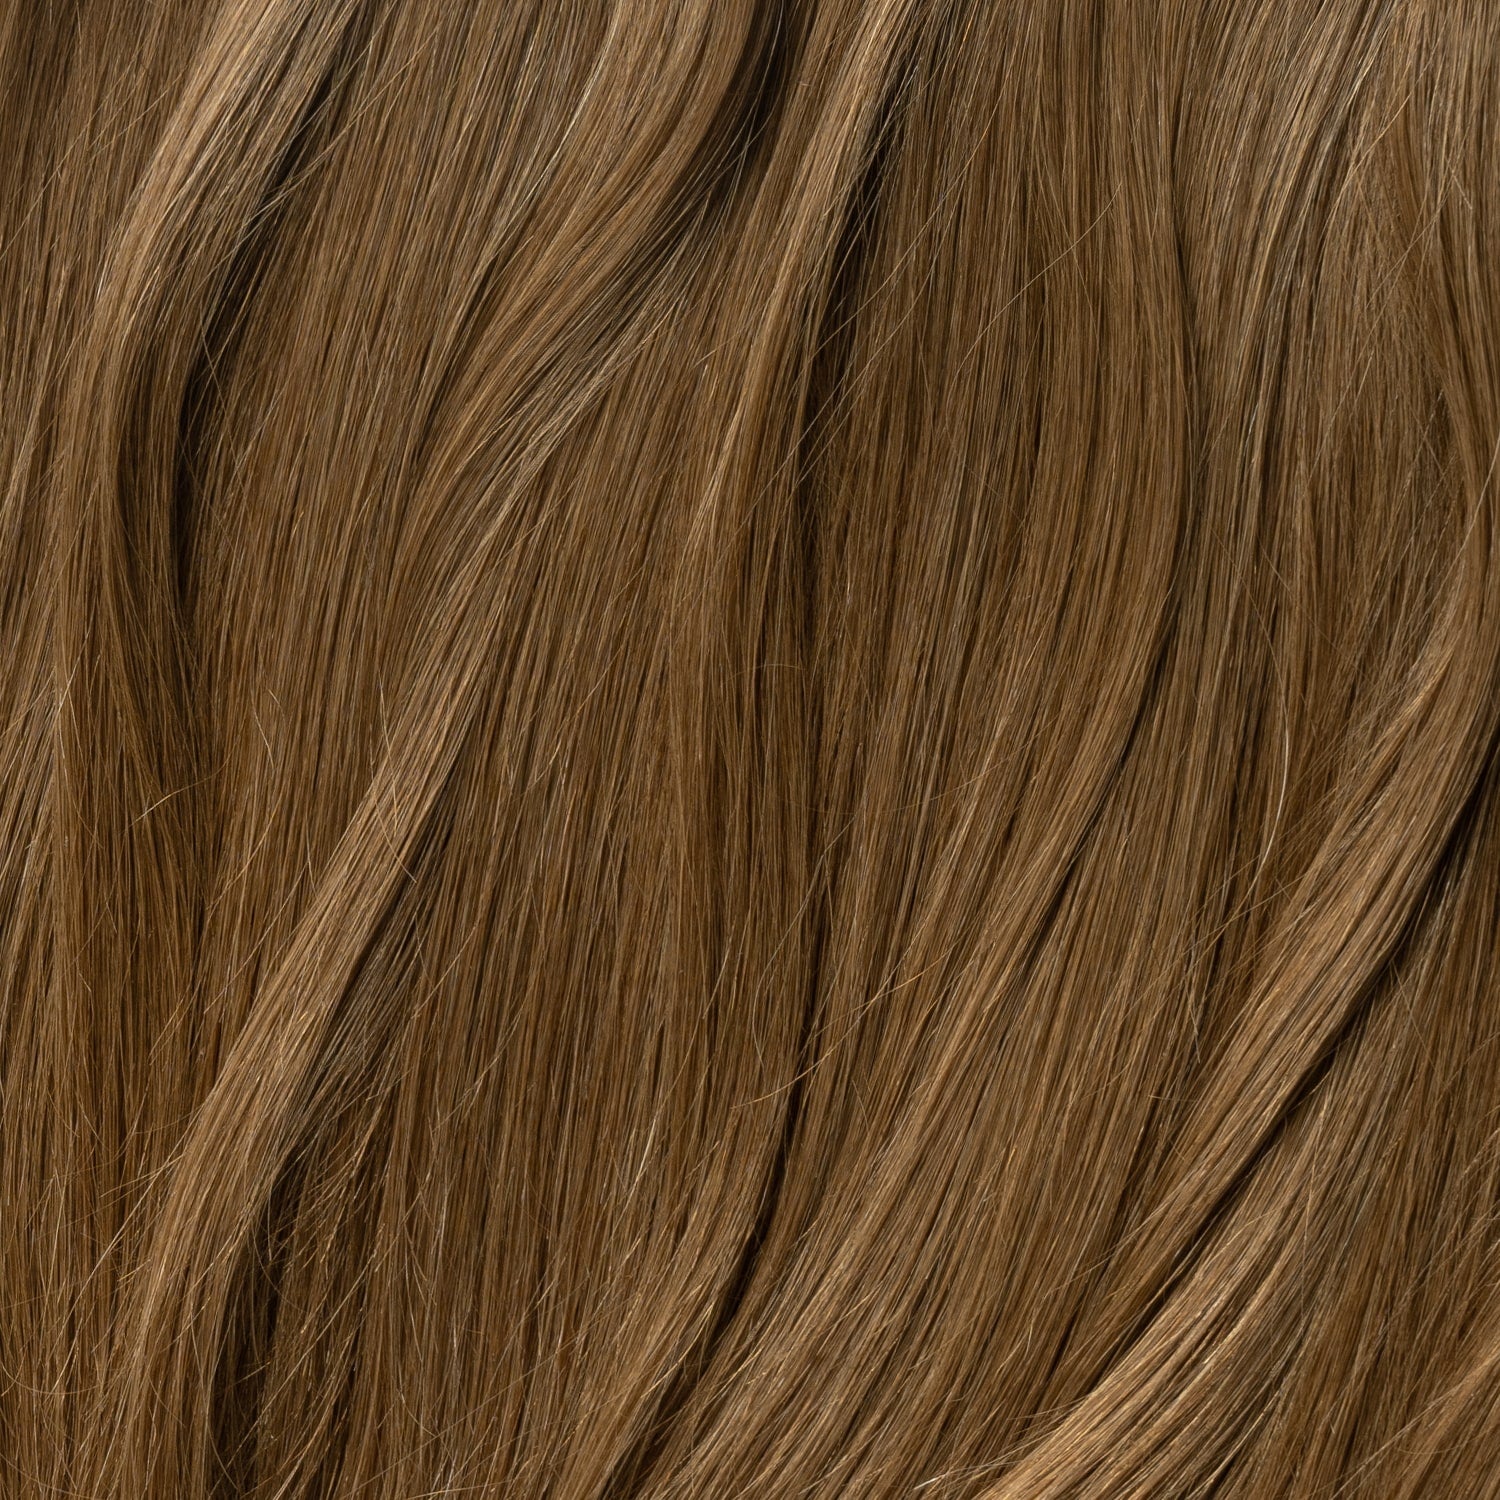 Clip on - Natural Brown 3